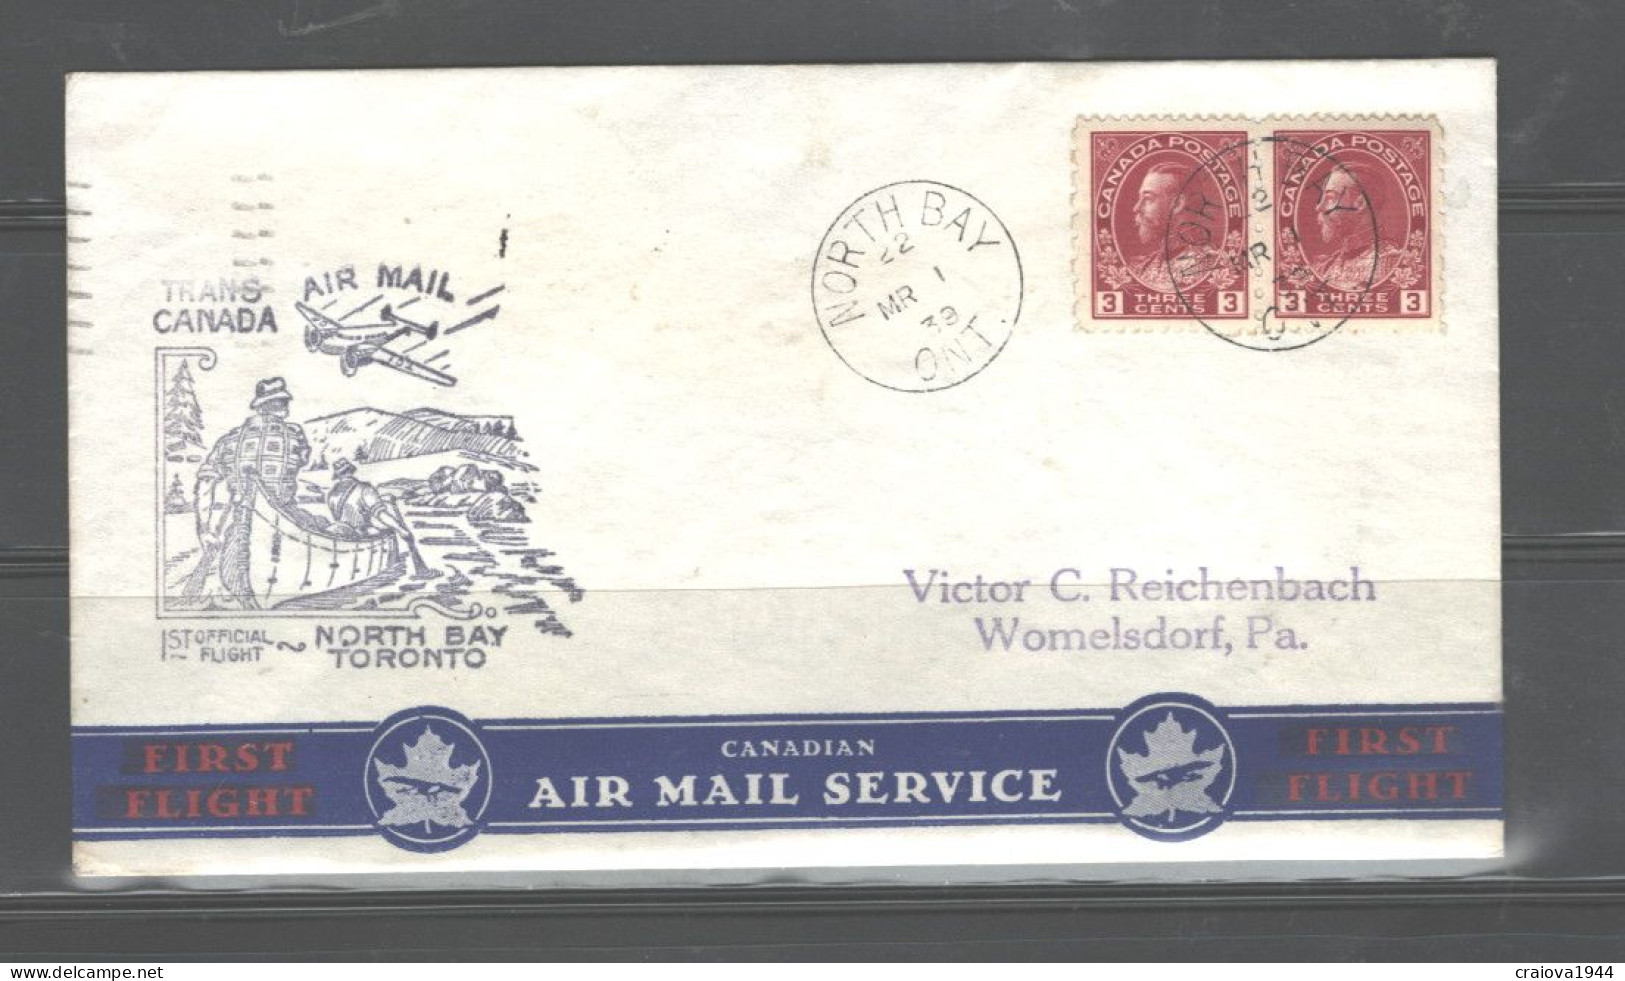 CANADA 01 MARCH 1939 NORTH BAY To TORONTO 1st OFFICIAL FLIGHT - Storia Postale